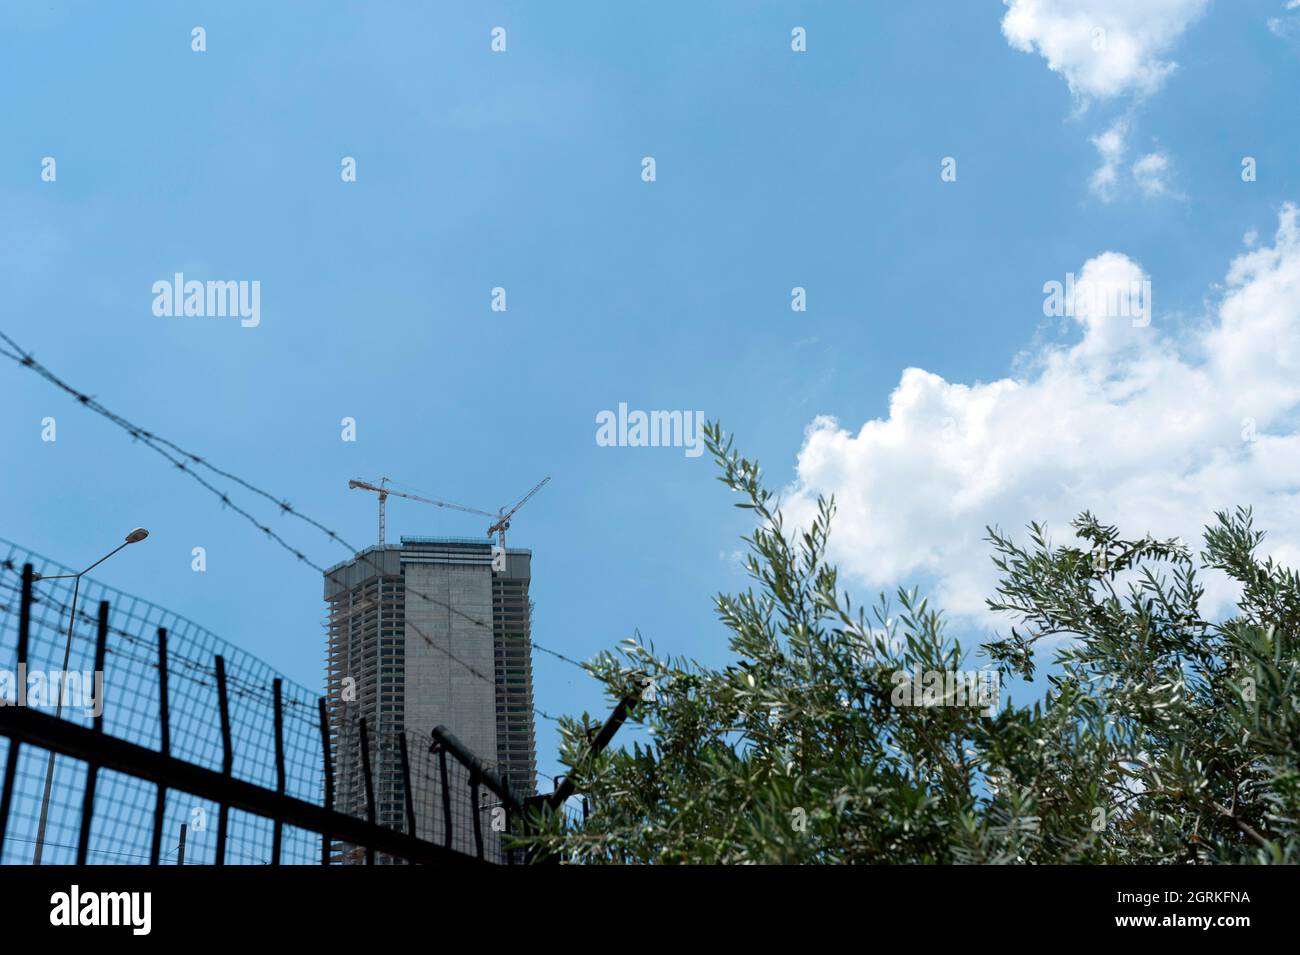 Tall building under construction in the city Stock Photo